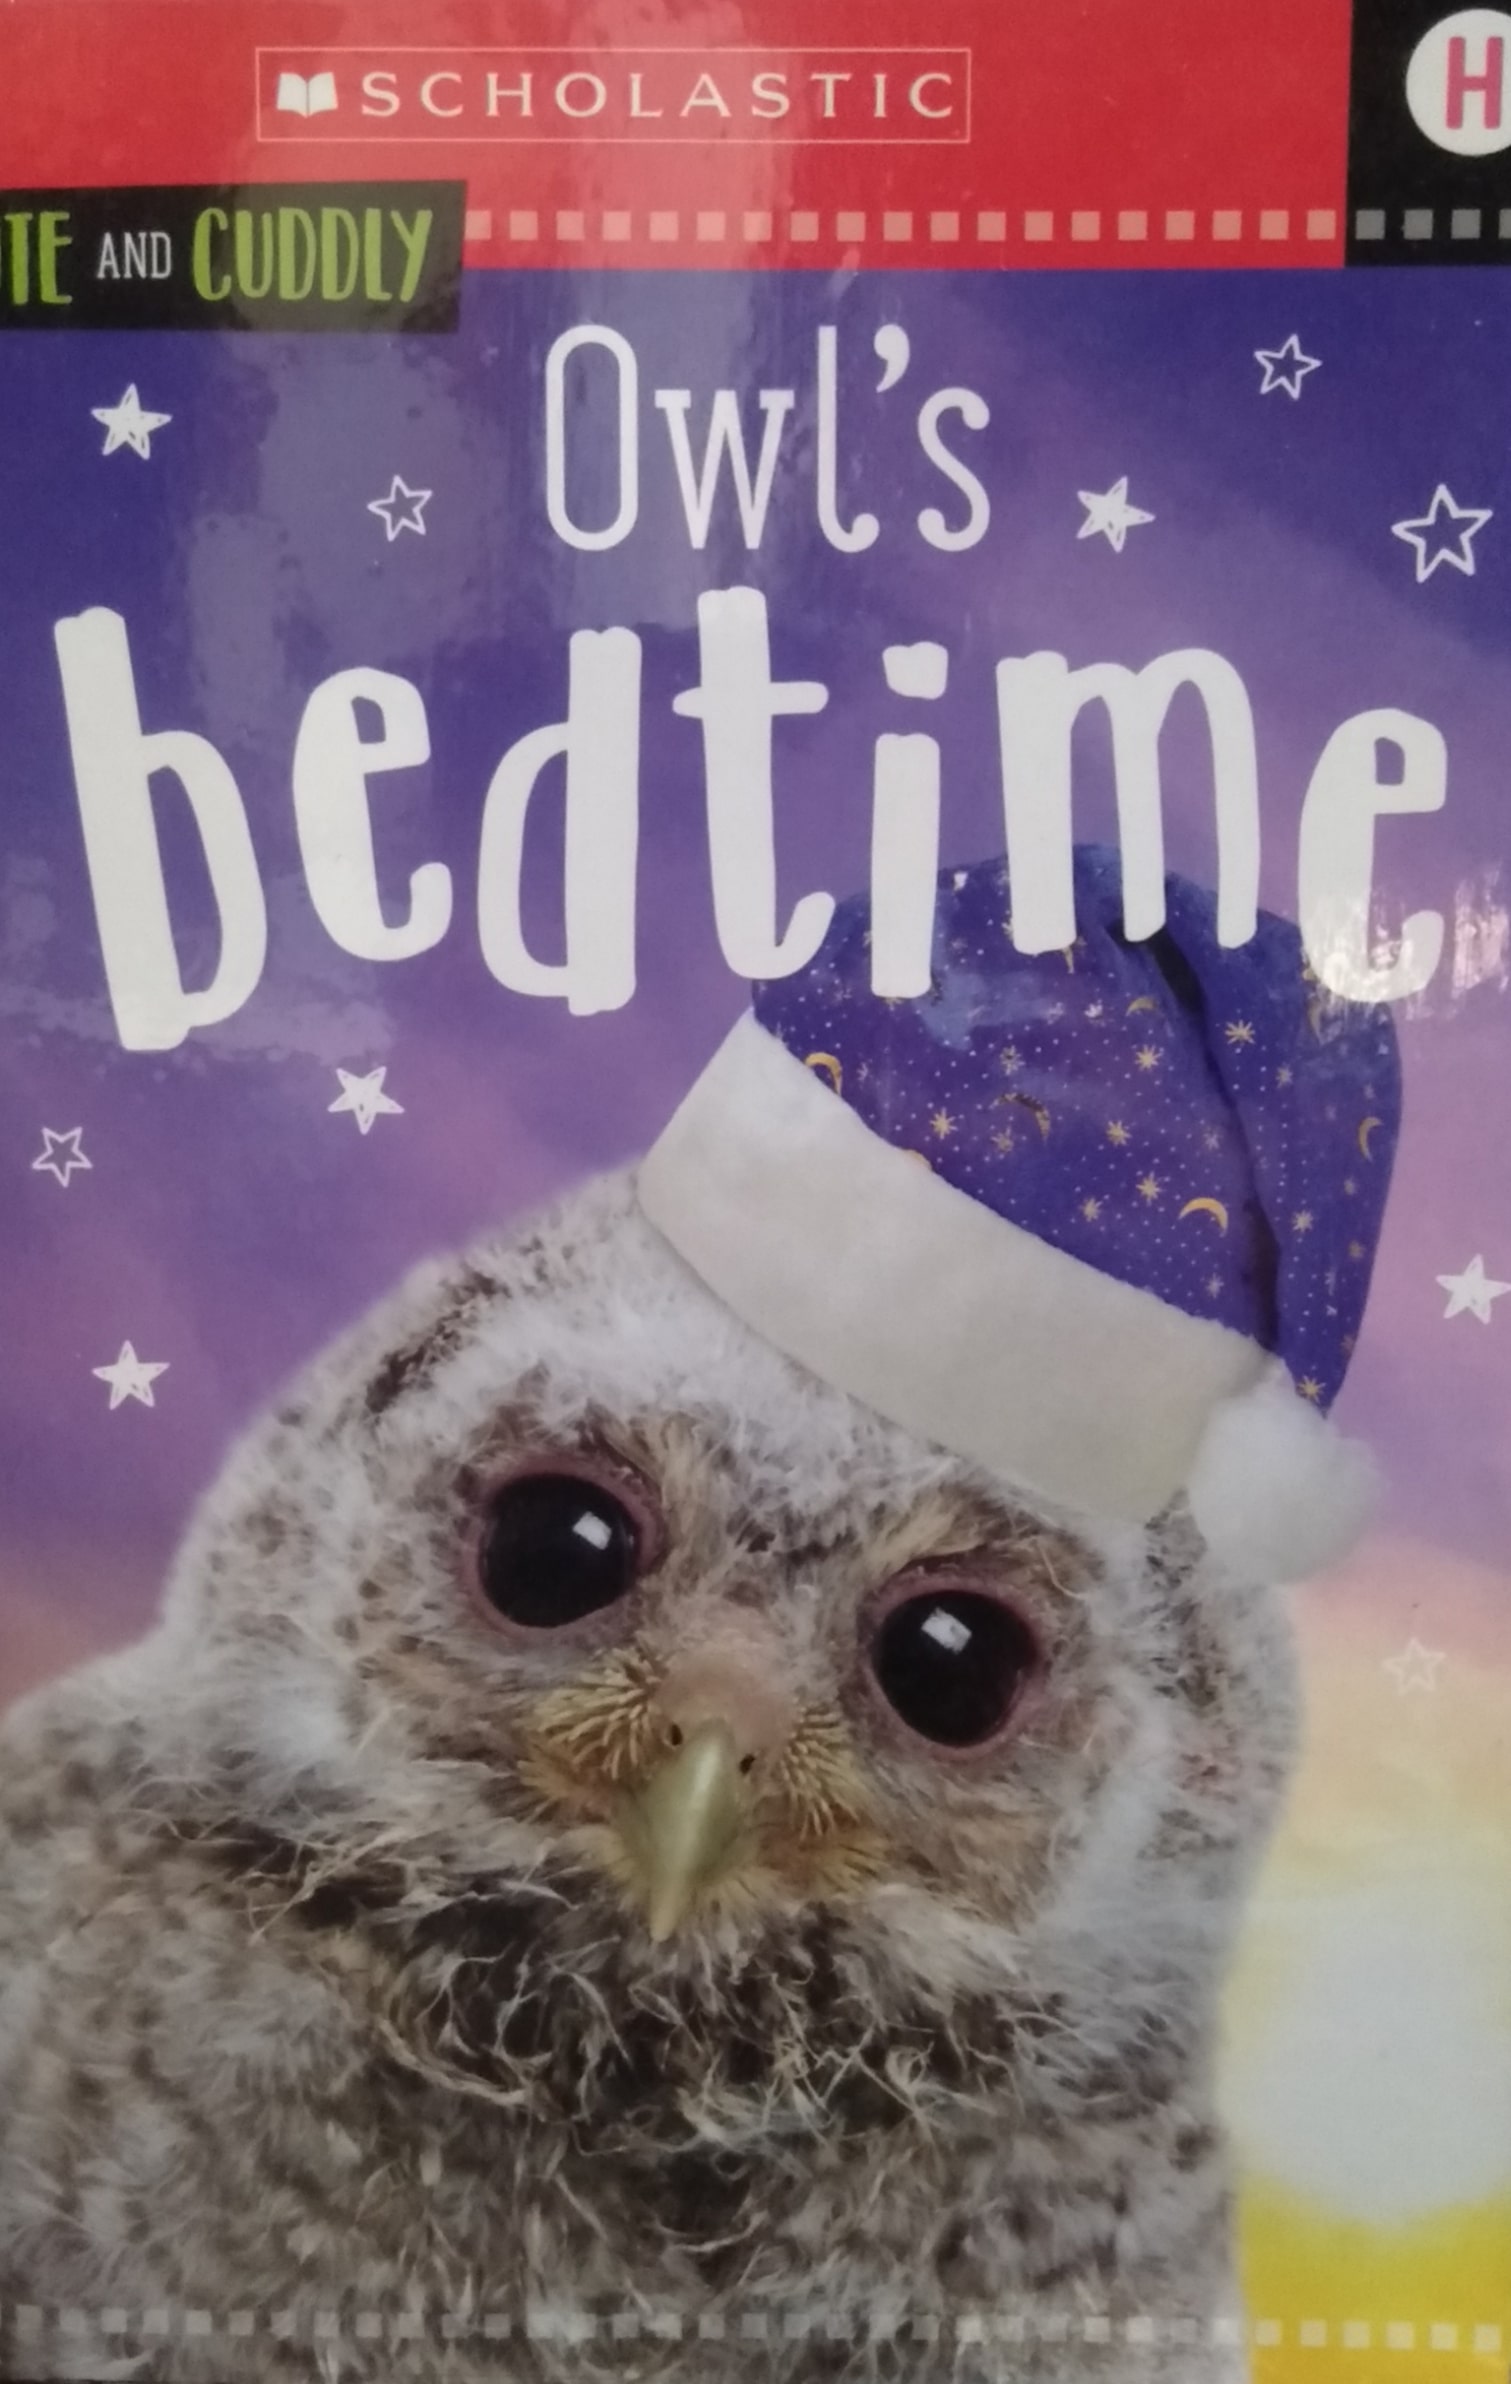 IMG : Animal Antics Cute and Cuddly Owl's bedtime